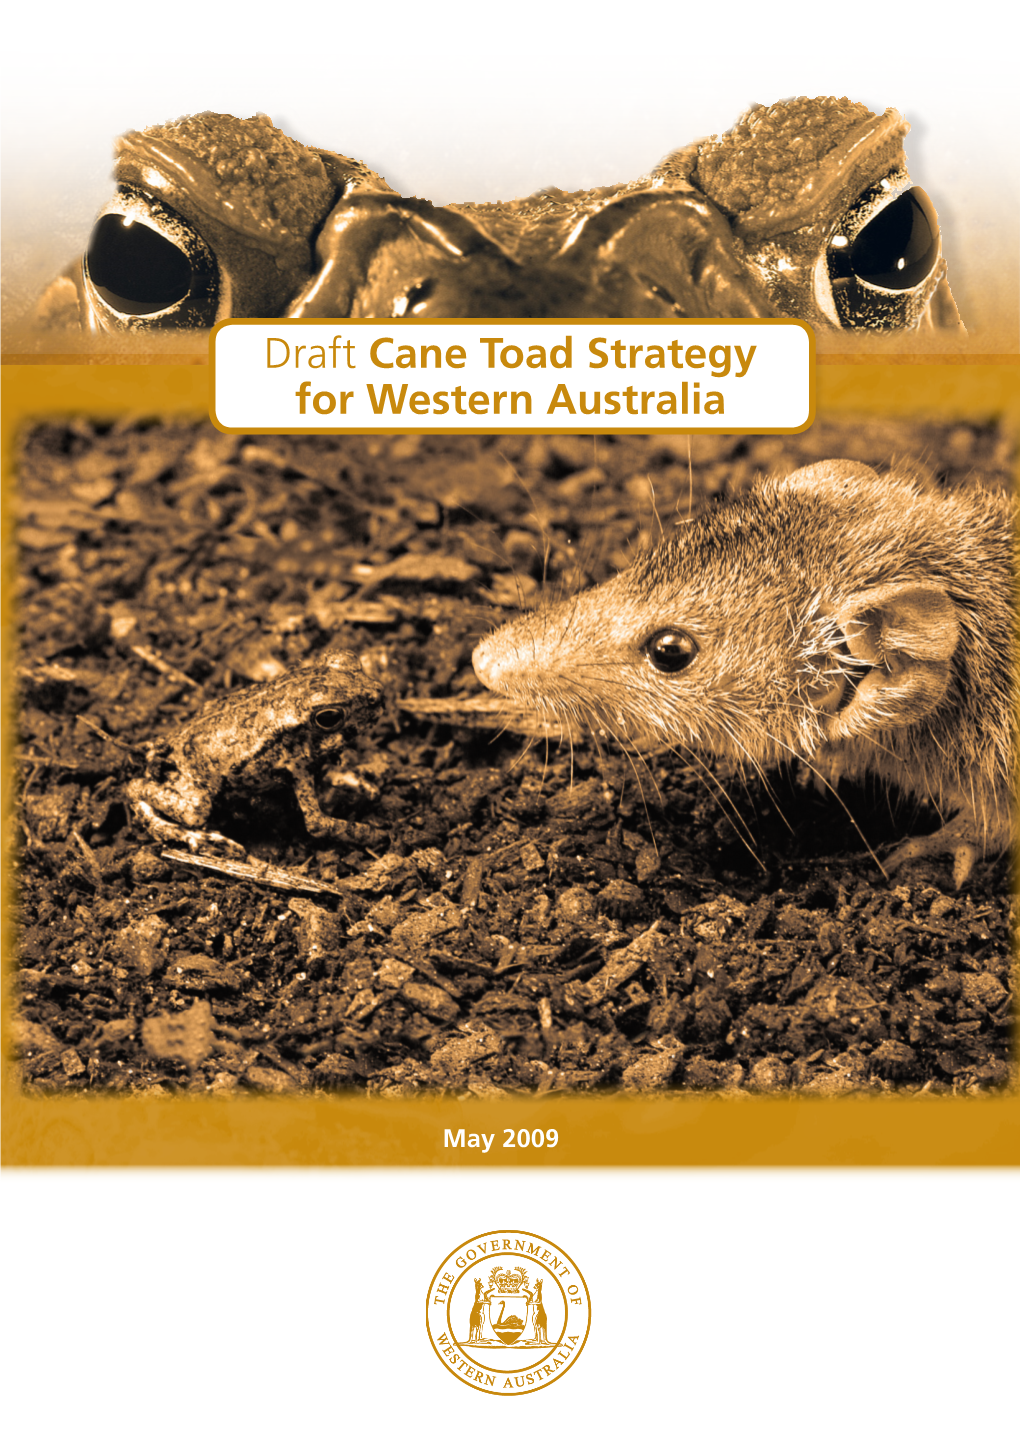 Draft Cane Toad Strategy for Western Australia